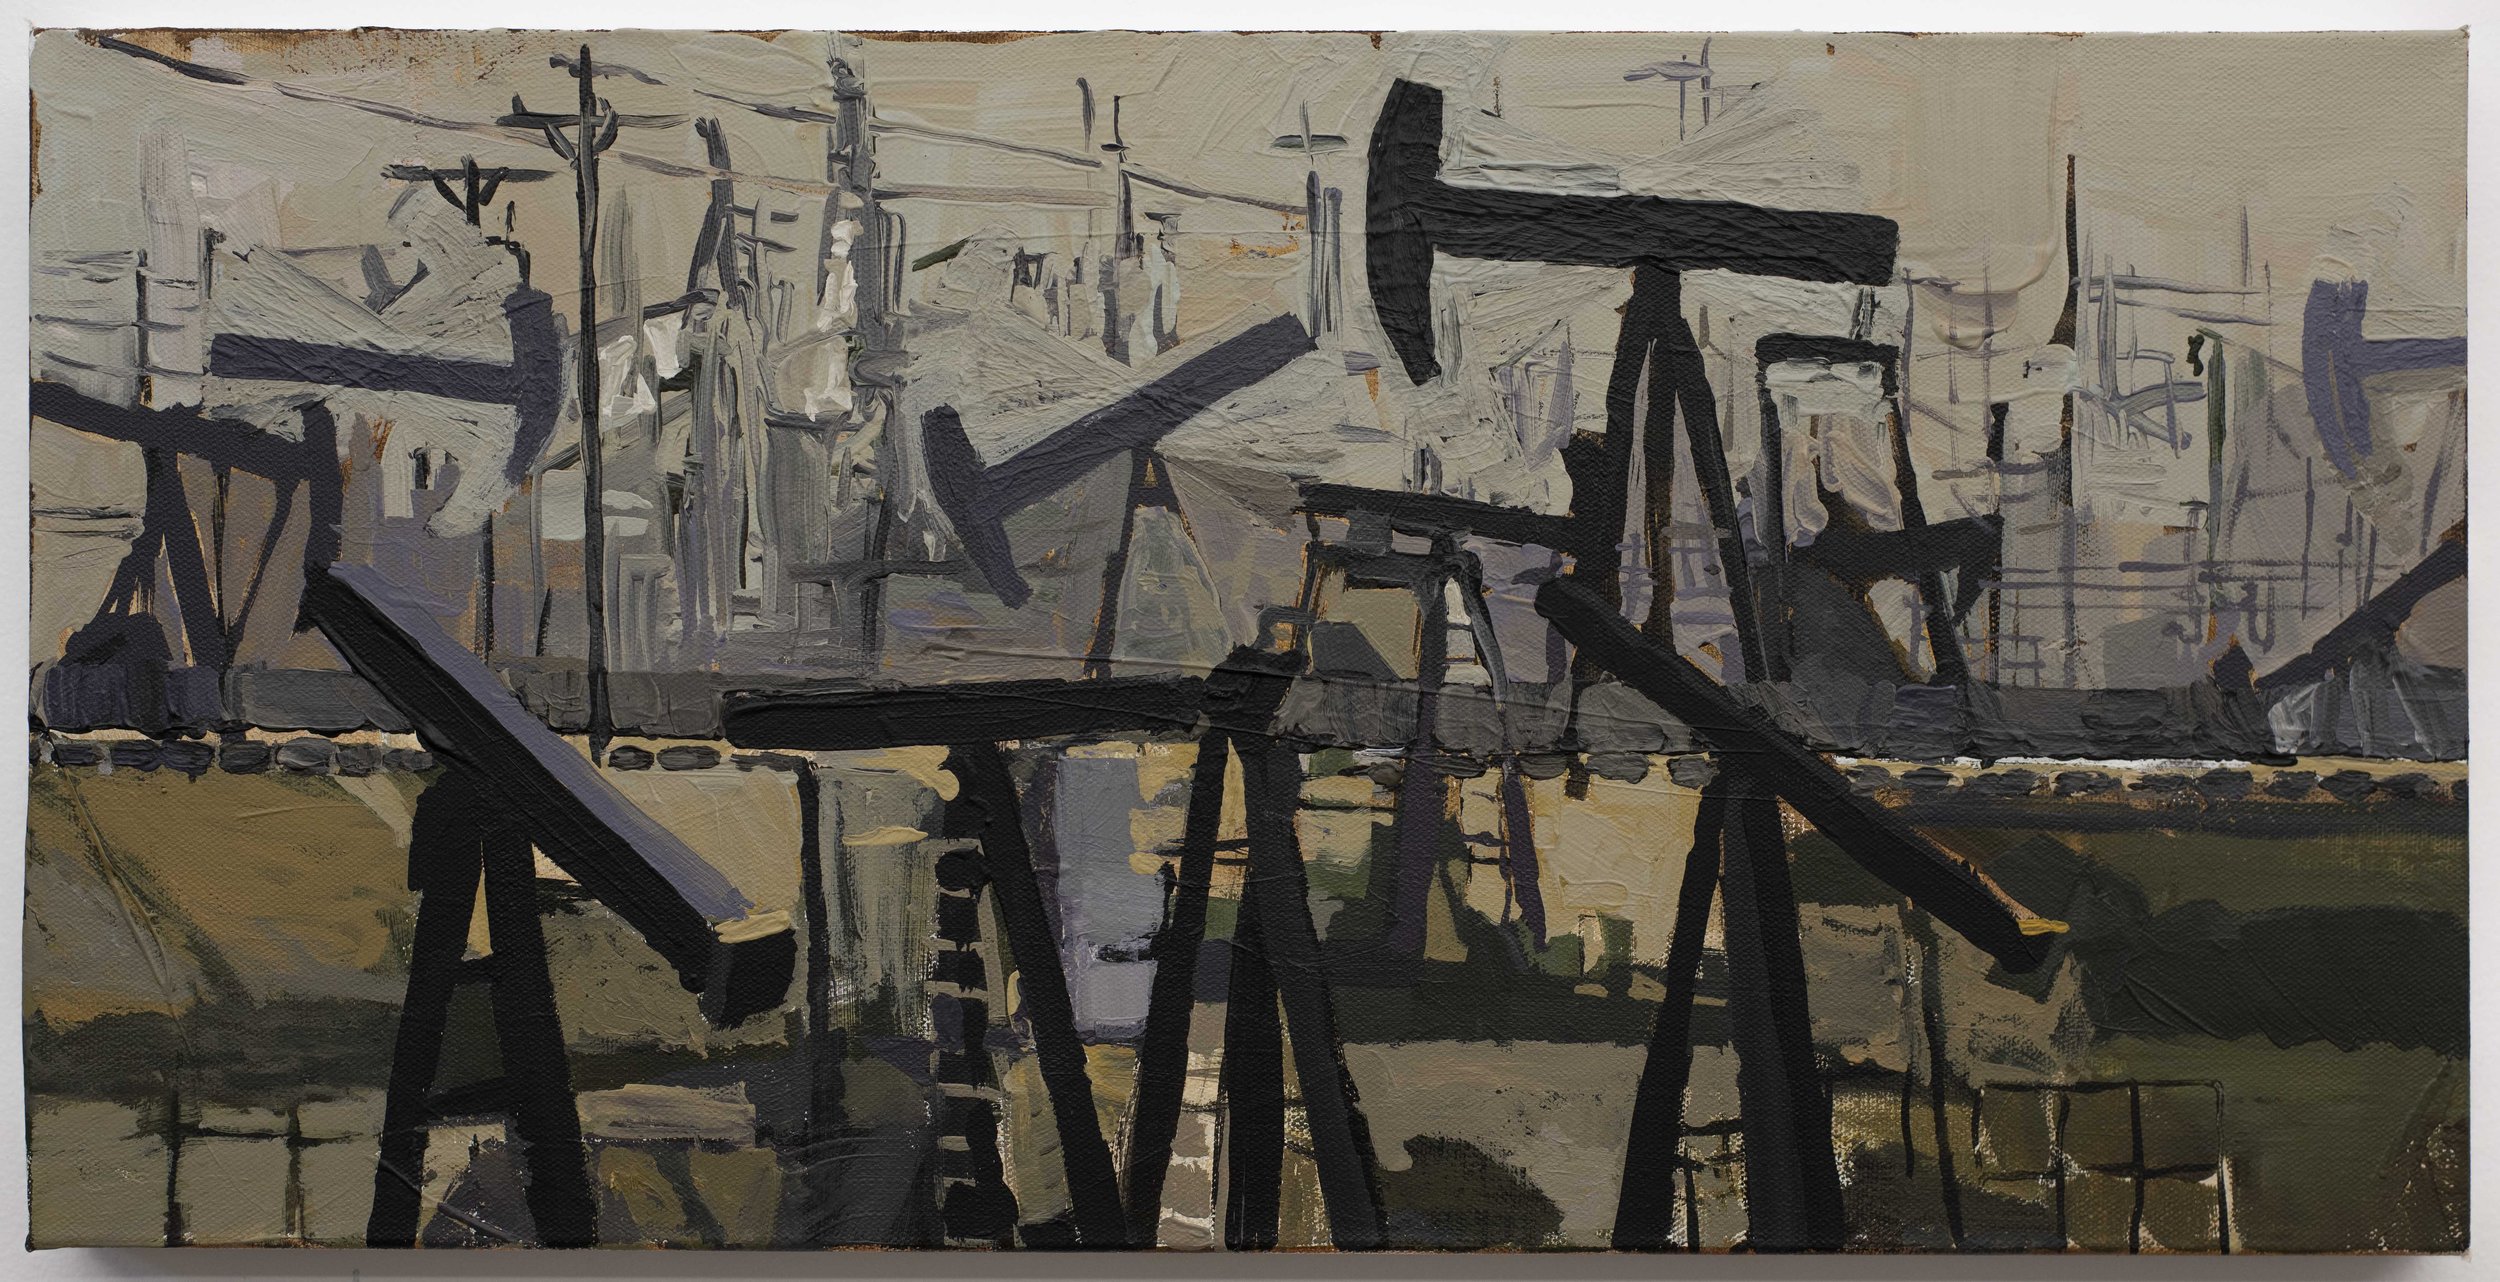  Landscape with Highway and Pumpjacks, acrylic on canvas, 12 x 24 inches, 2021 